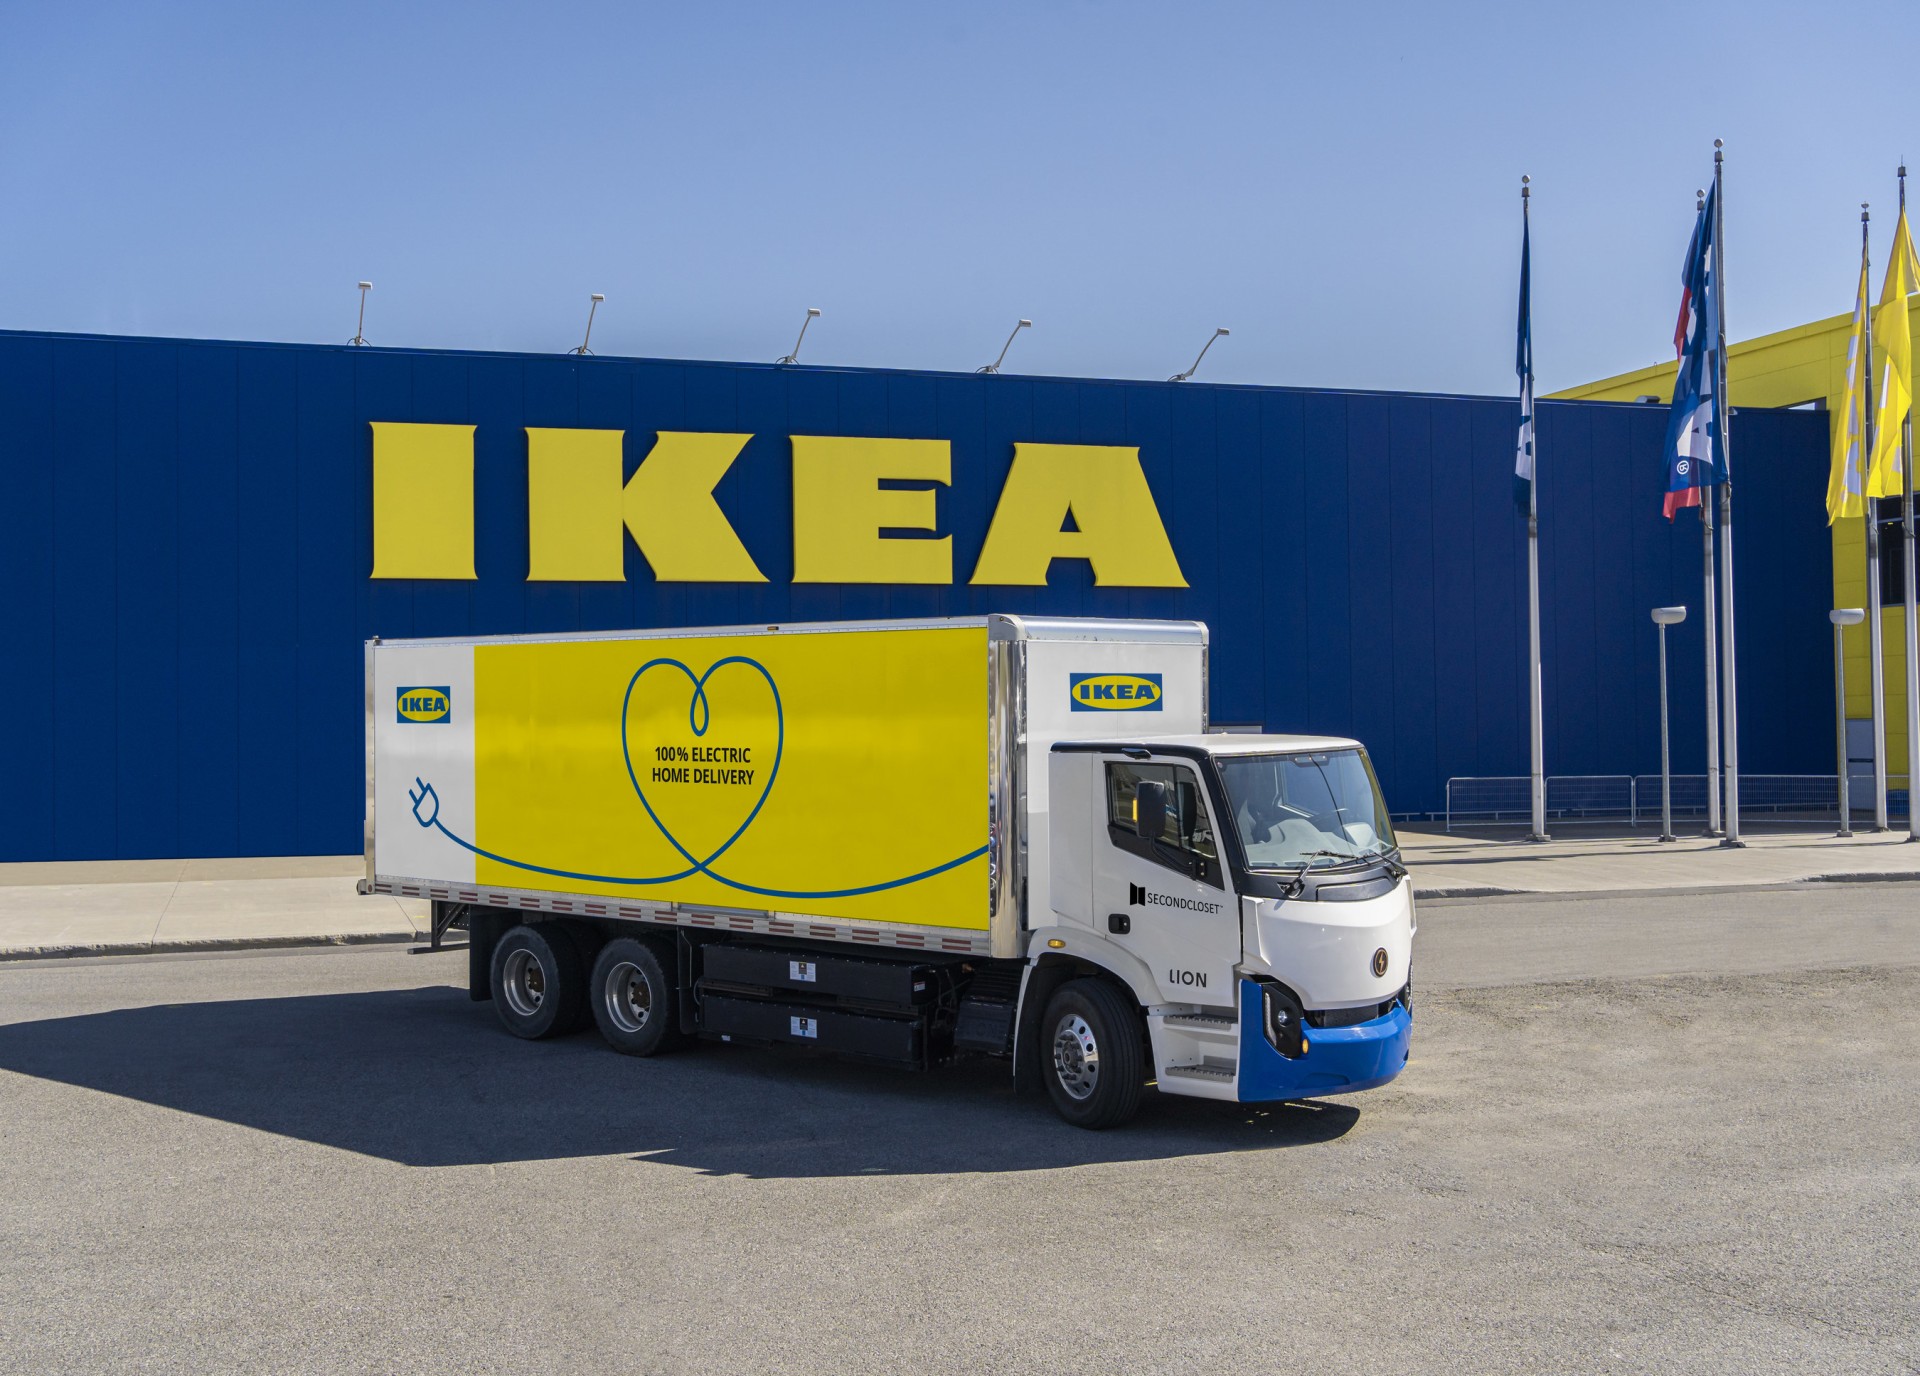 On the road: make your van a place of well-being - IKEA Switzerland